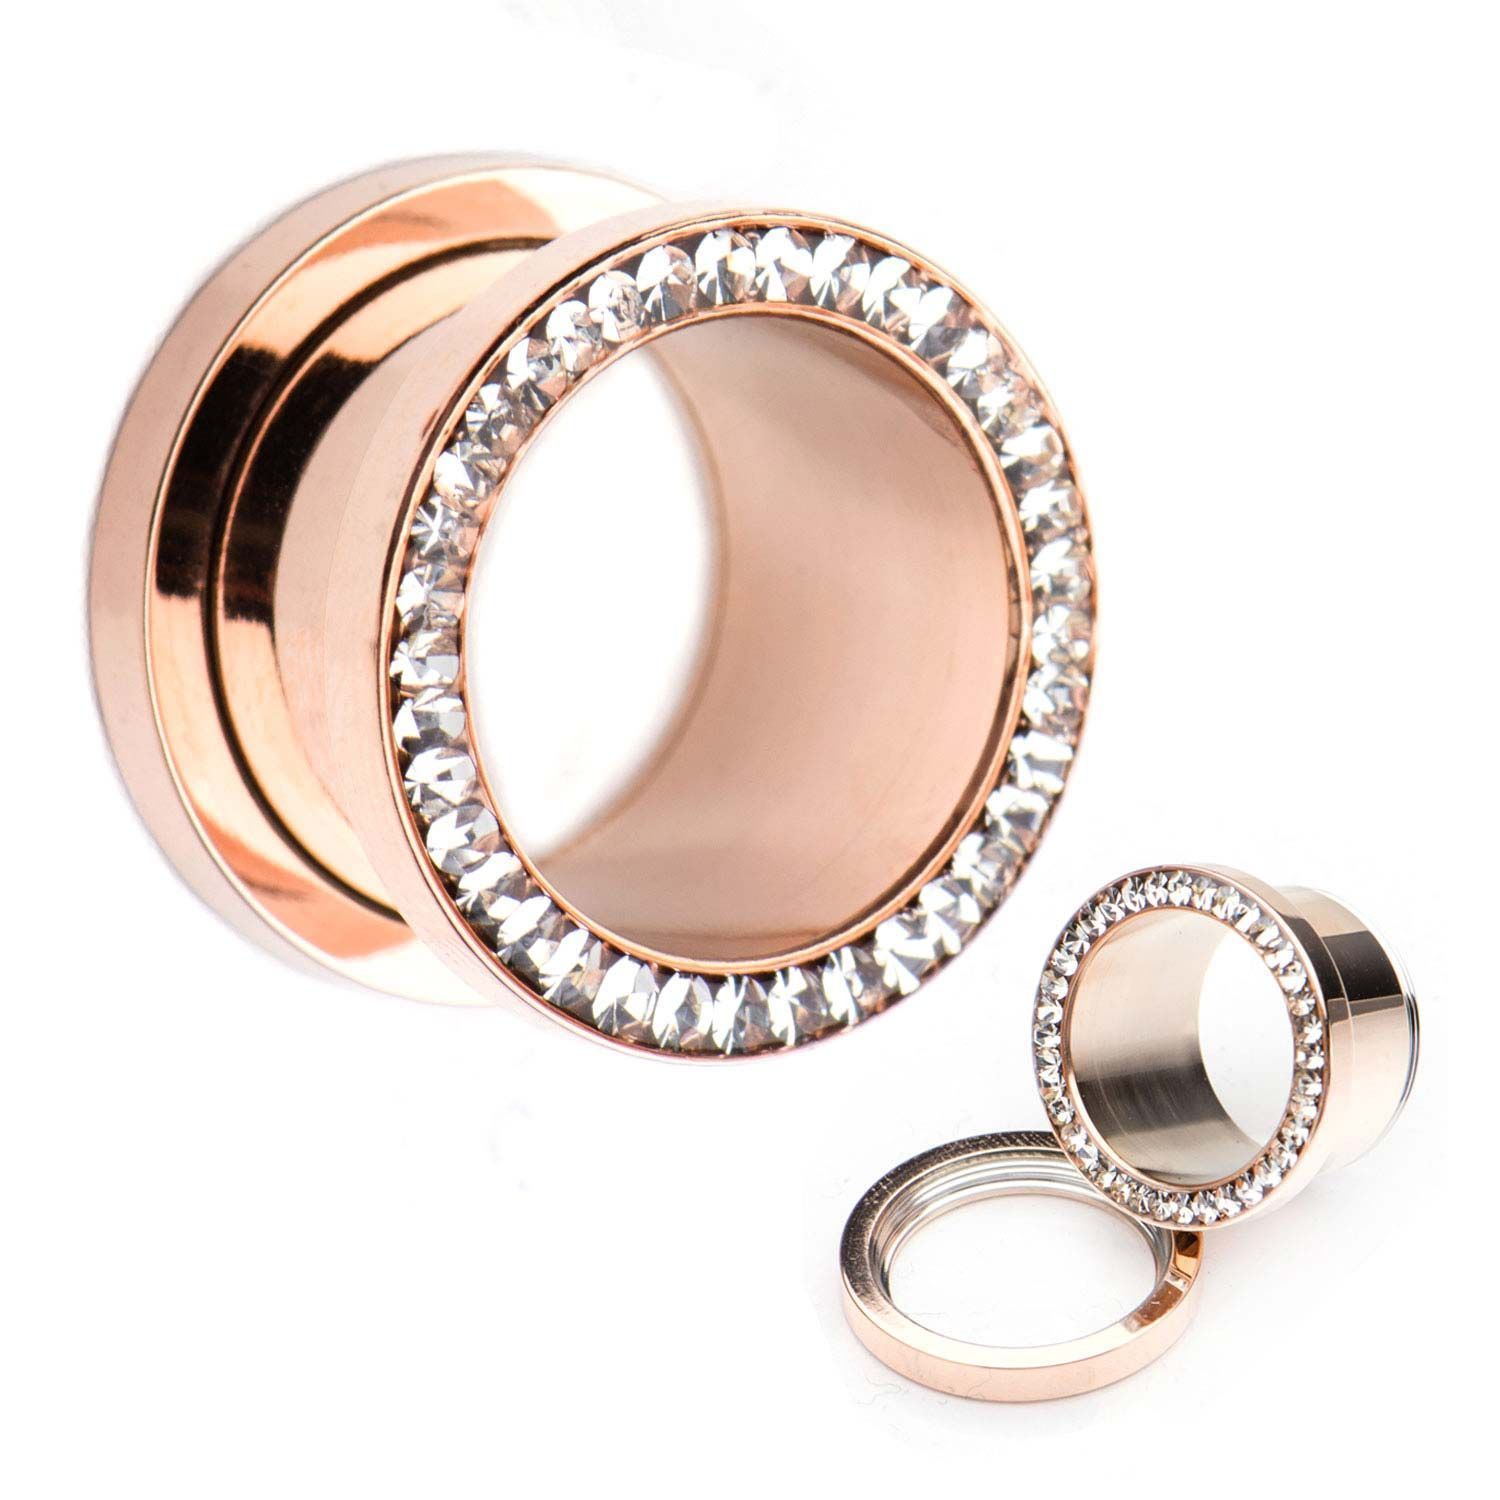 Tunnels - Double Flare Rose Gold Plated Multigem Clear CZ Tunnel Plugs - 1 Pair  sbvprg2834c -Rebel Bod-RebelBod